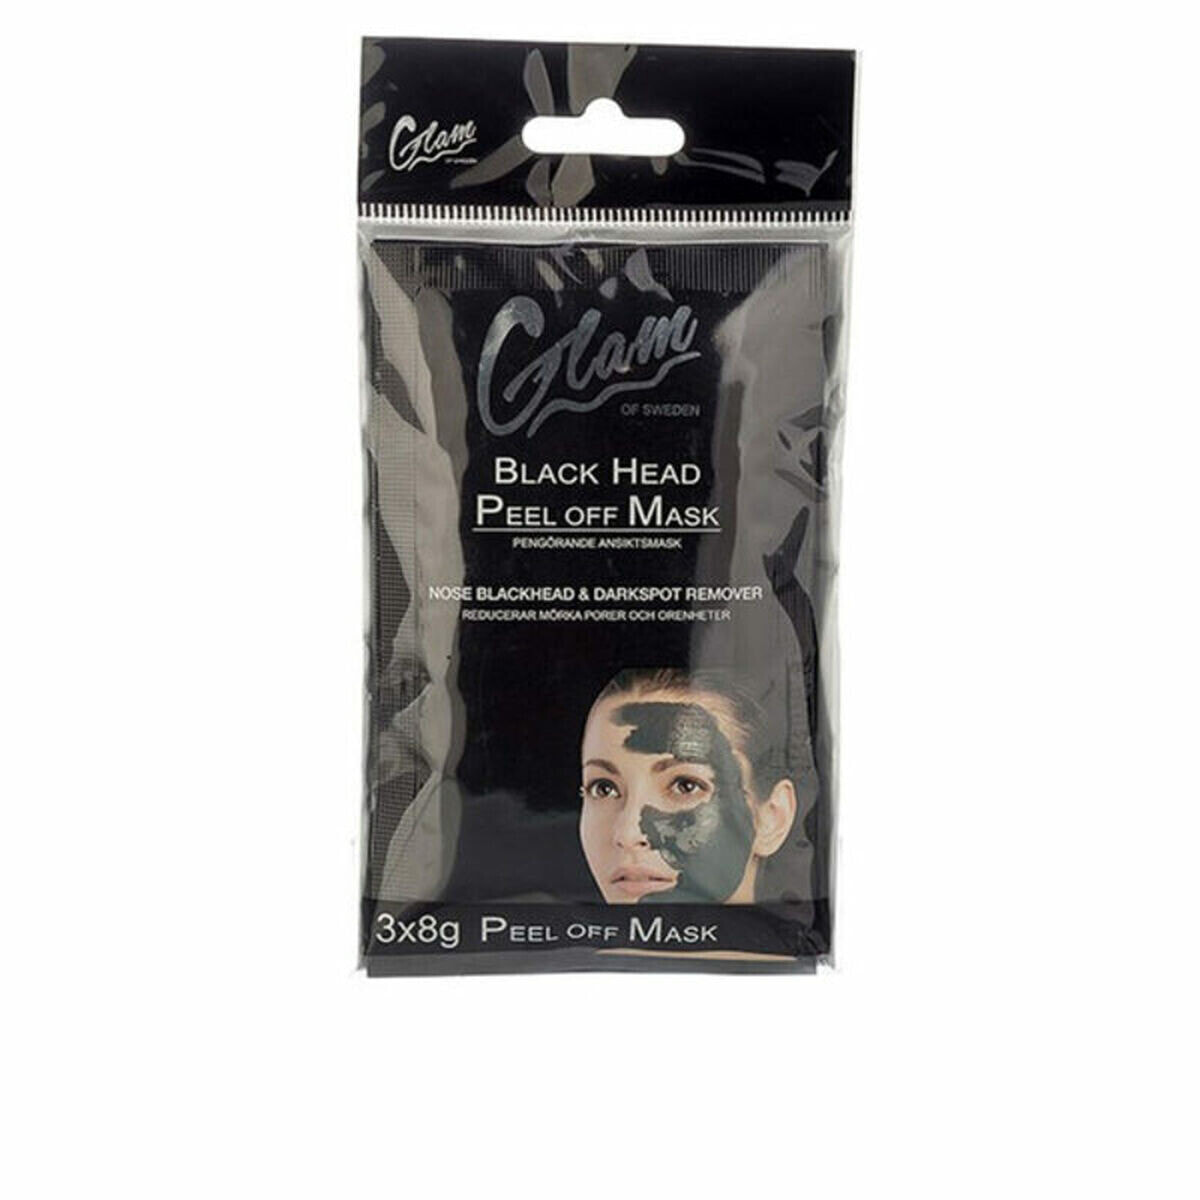 Purifying Mask Glam Of Sweden Mask 8 g (3 x 8 g )